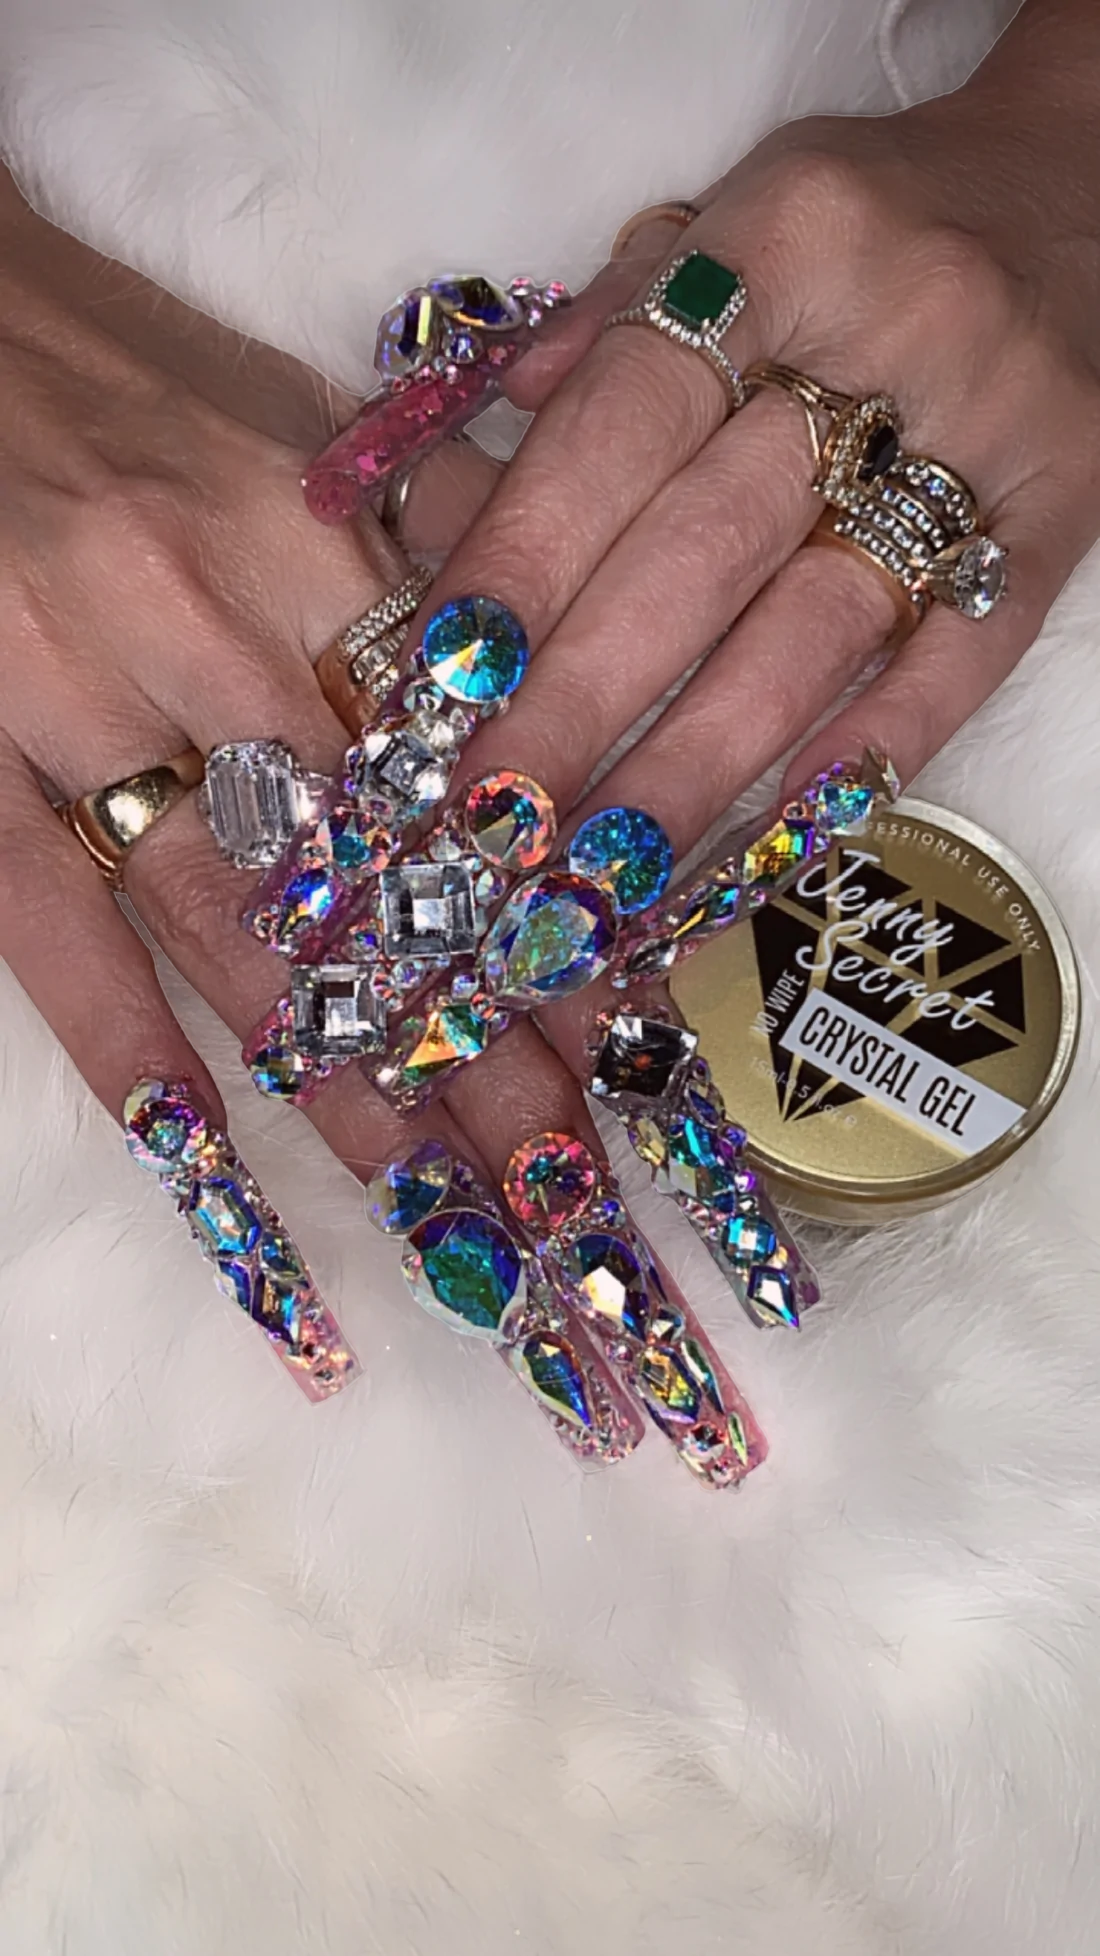 Cardi B reveals insane diamond-encrusted manicure only she could wear |  Metro News